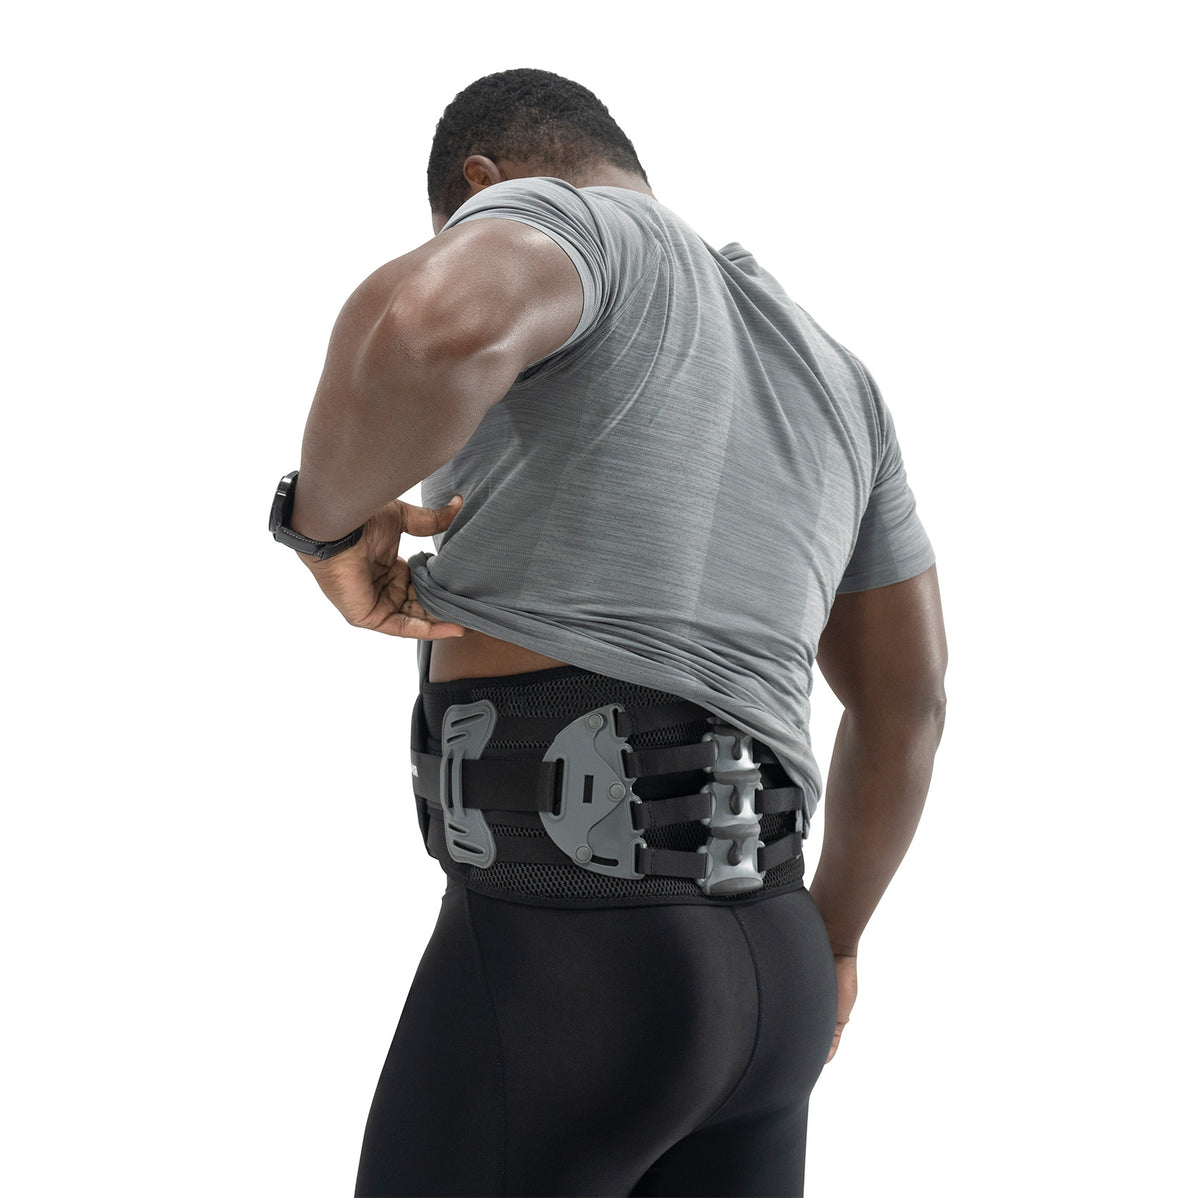 Spinal Armor Back Support System Deluxe Pack